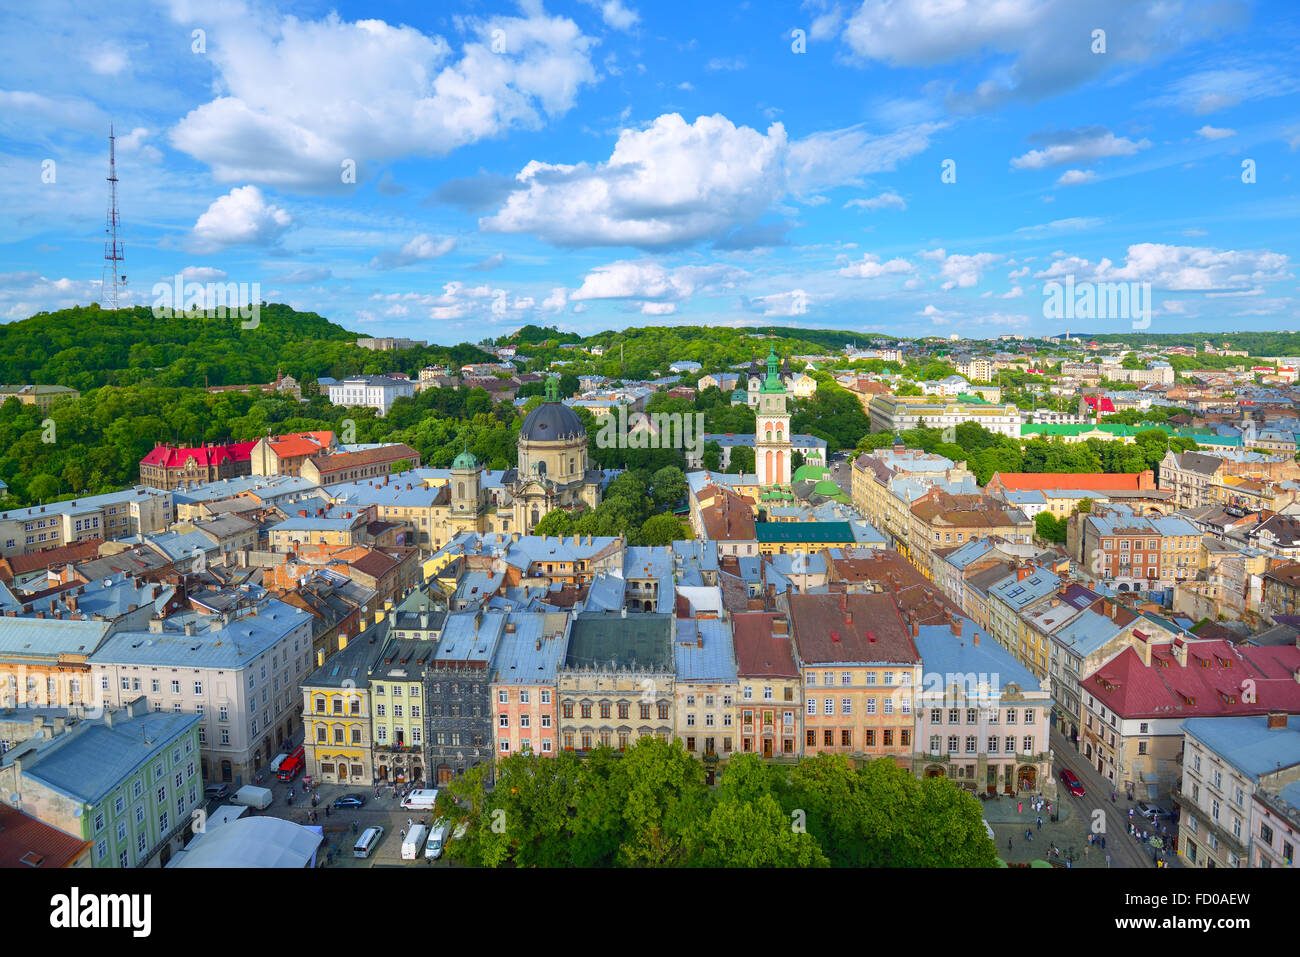 Lviv City skyline. Central part of the old city of Lvov against clouds and the blue sky. Ukraine Stock Photo